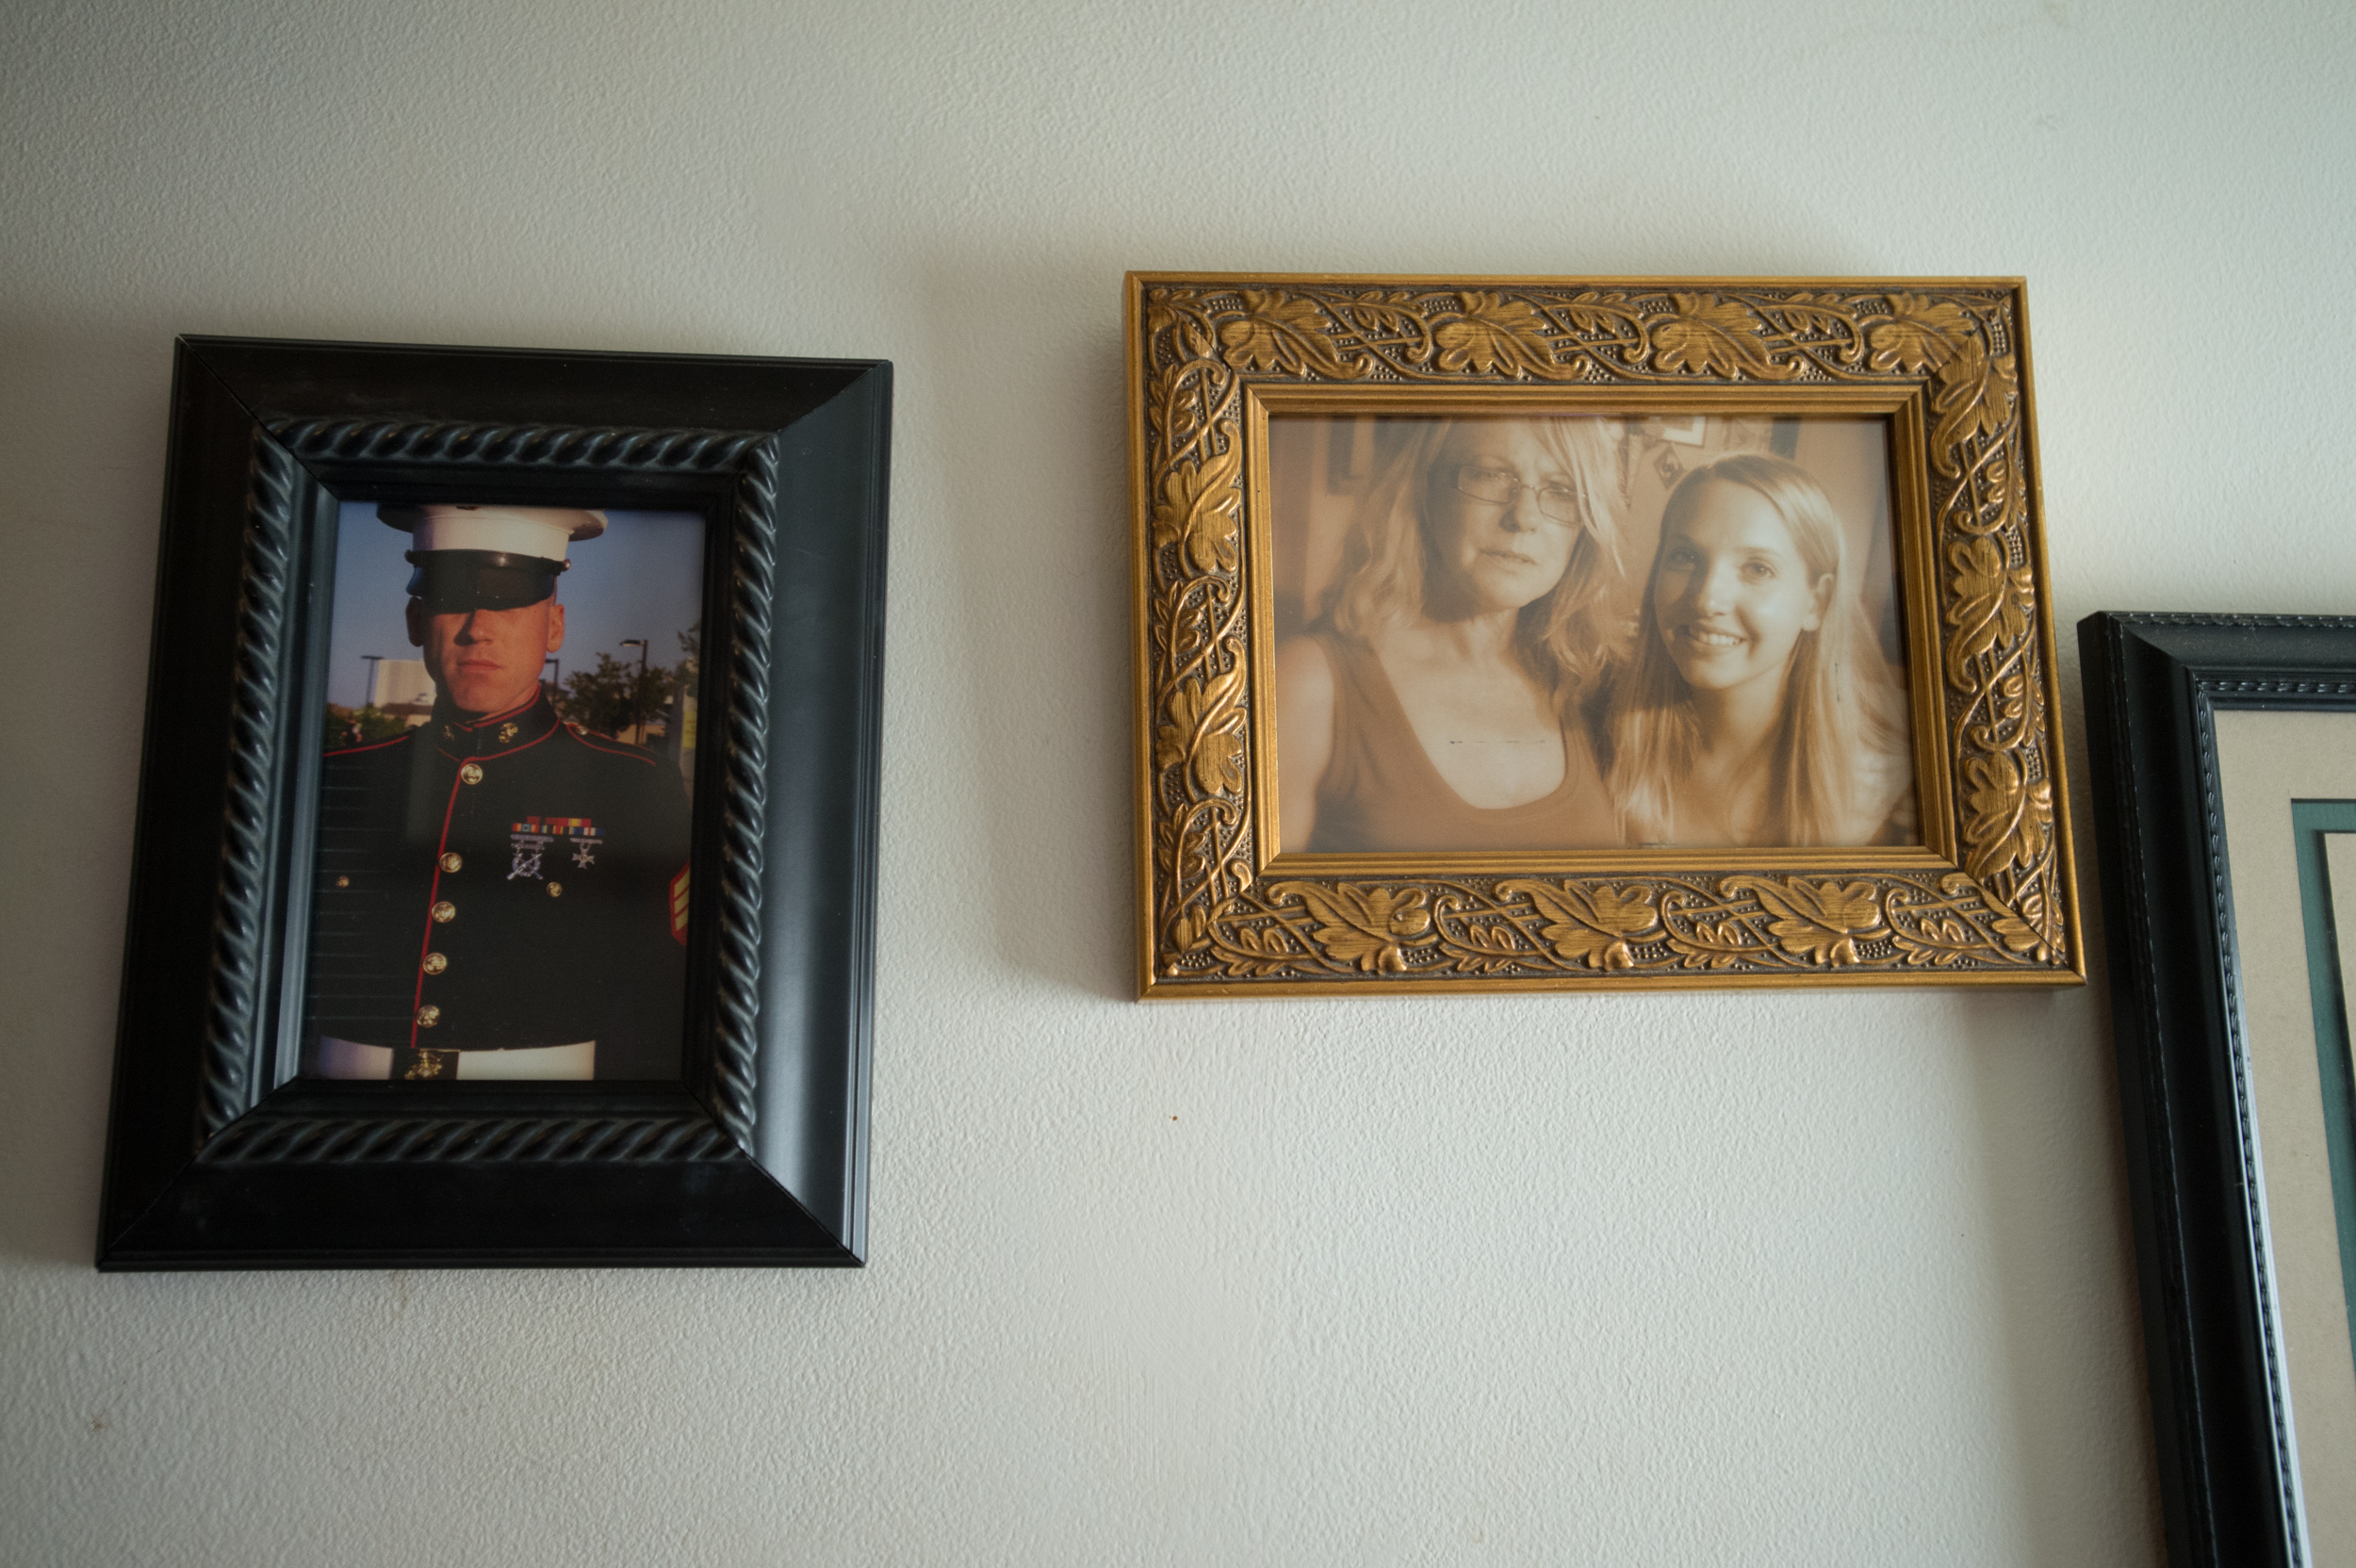  Photos of Carol's two children, Gabe Sloan and Margaret Elizabeth are among many wall hangings at Carol's house. 